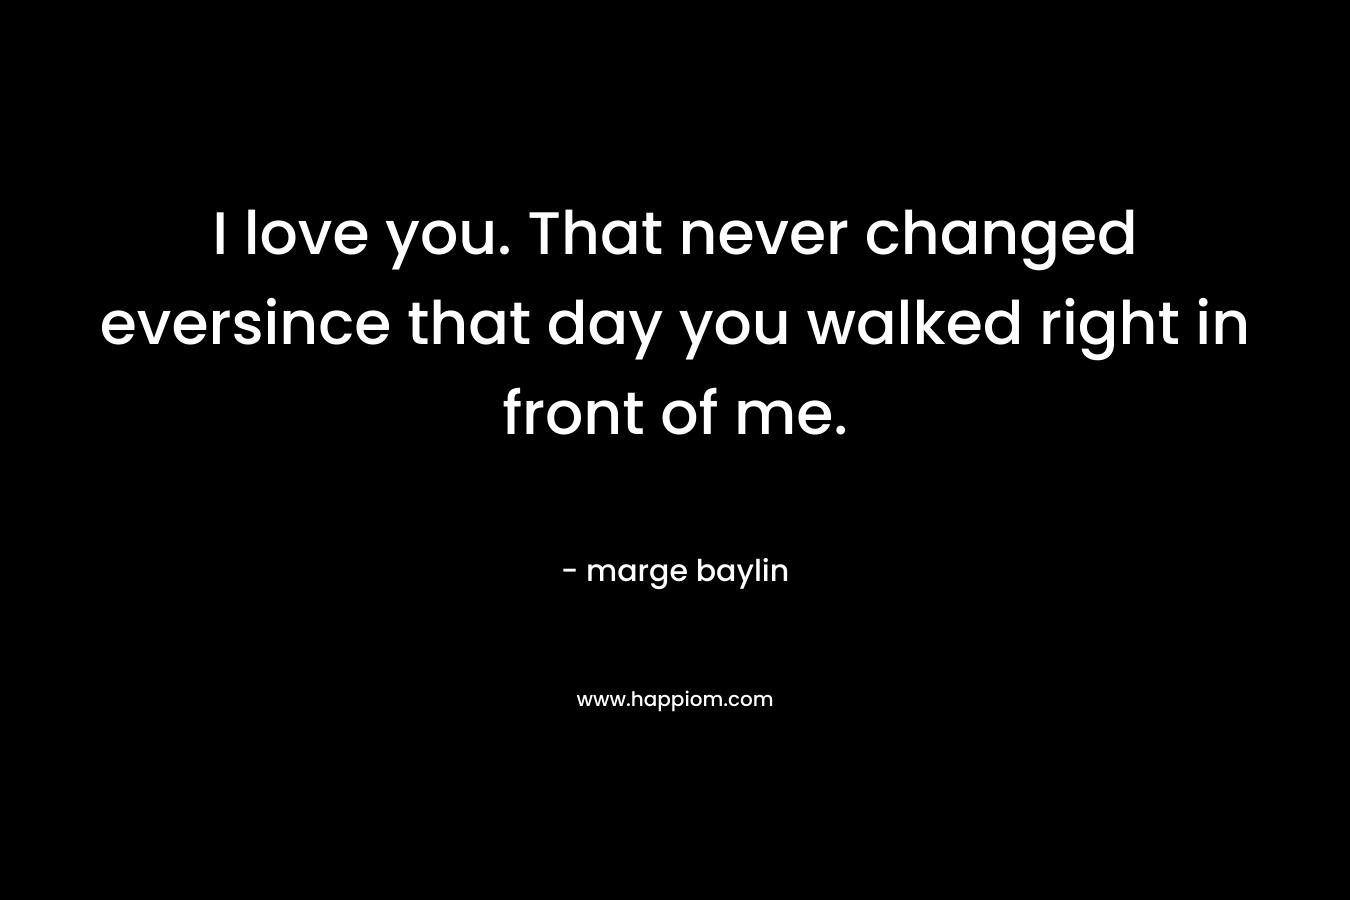 I love you. That never changed eversince that day you walked right in front of me.